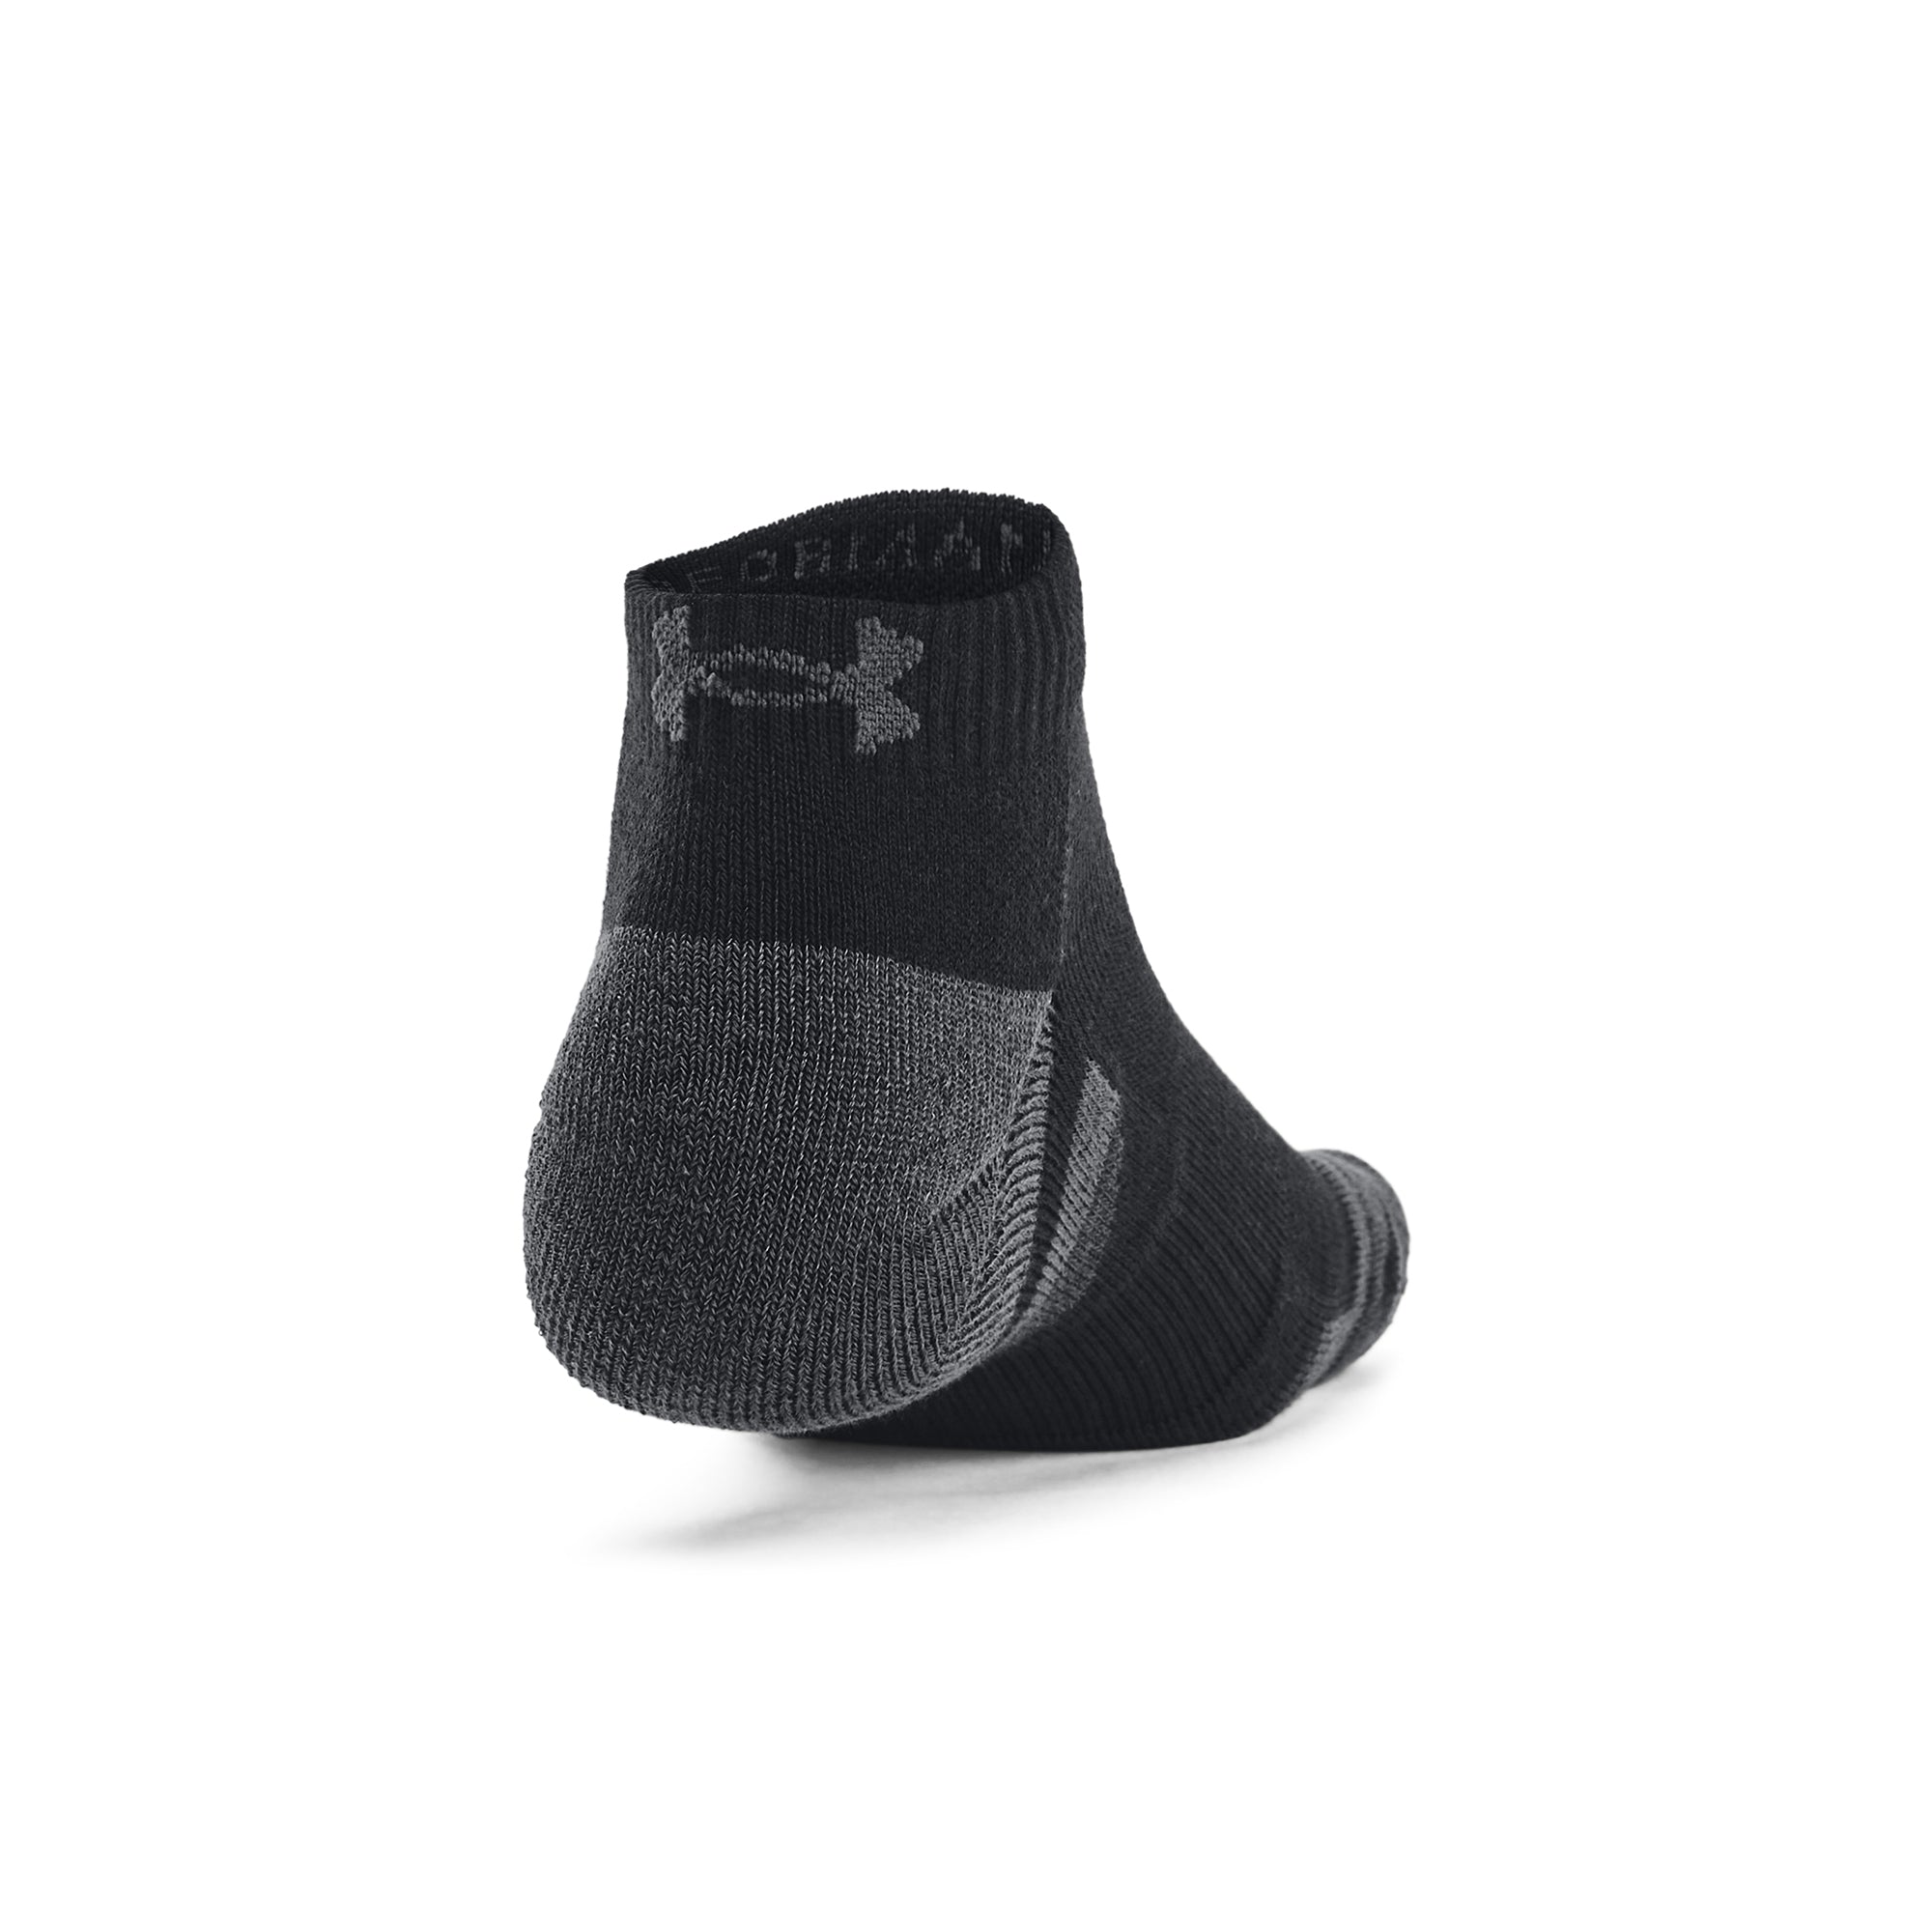 Under Armour Golf Performance Tech Low Sock - 3 Pack 1379504 Black 001 ...